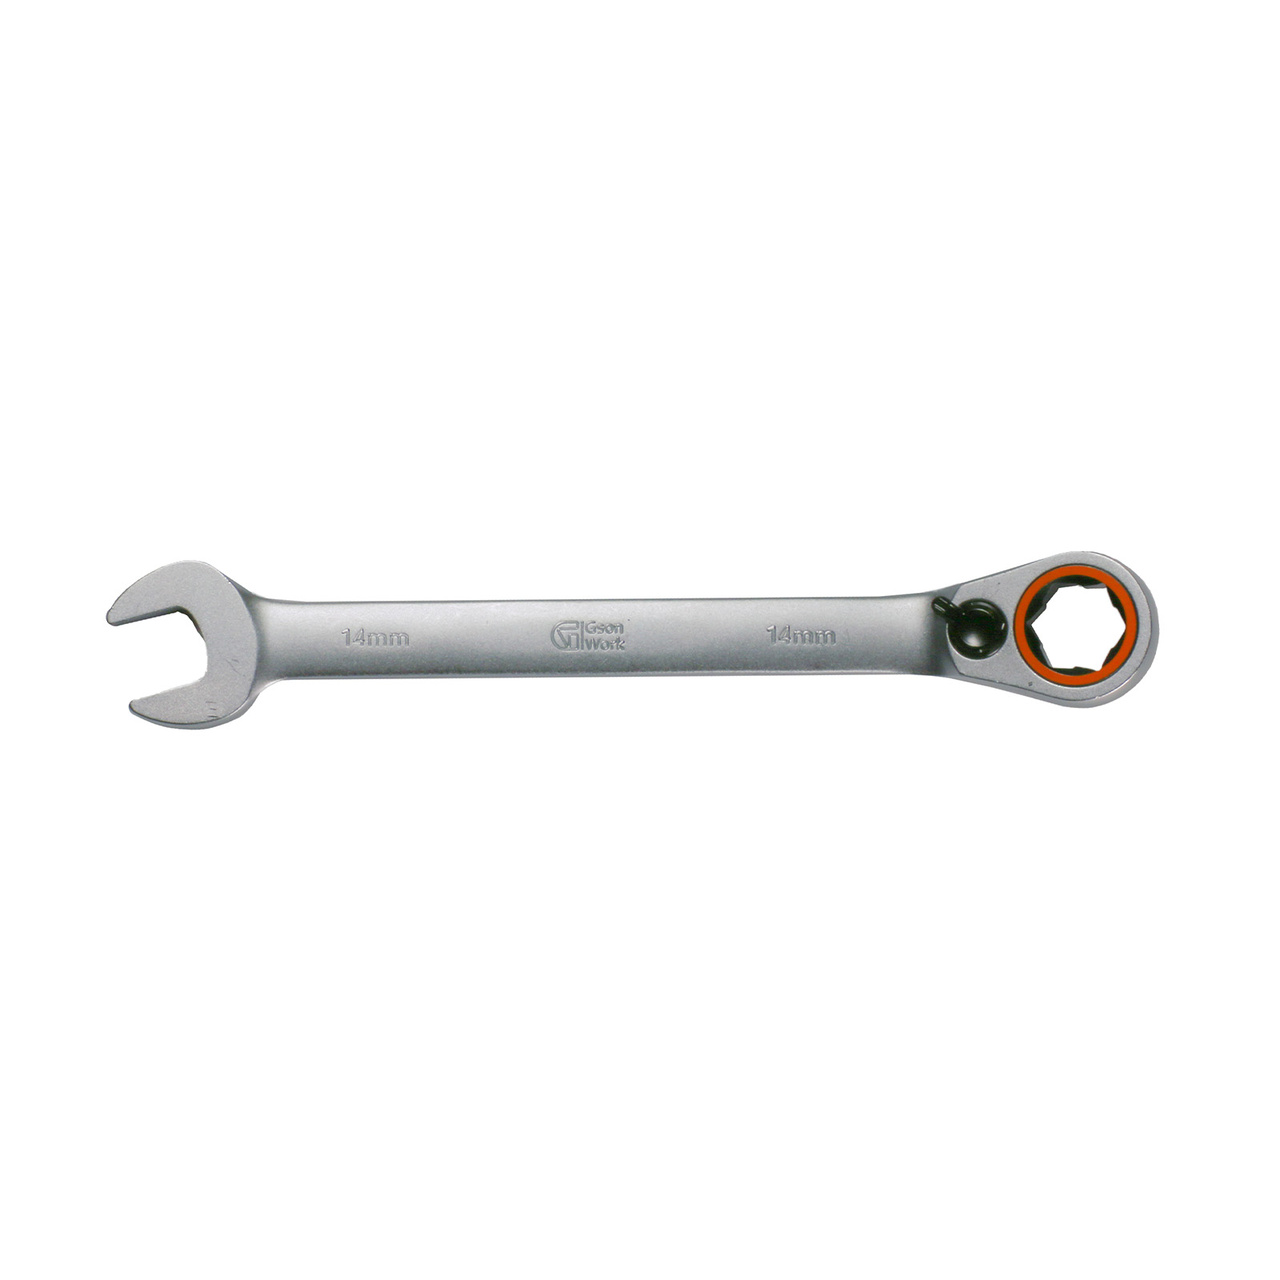 Reversible Rose Ratchet Wrench 11 mm